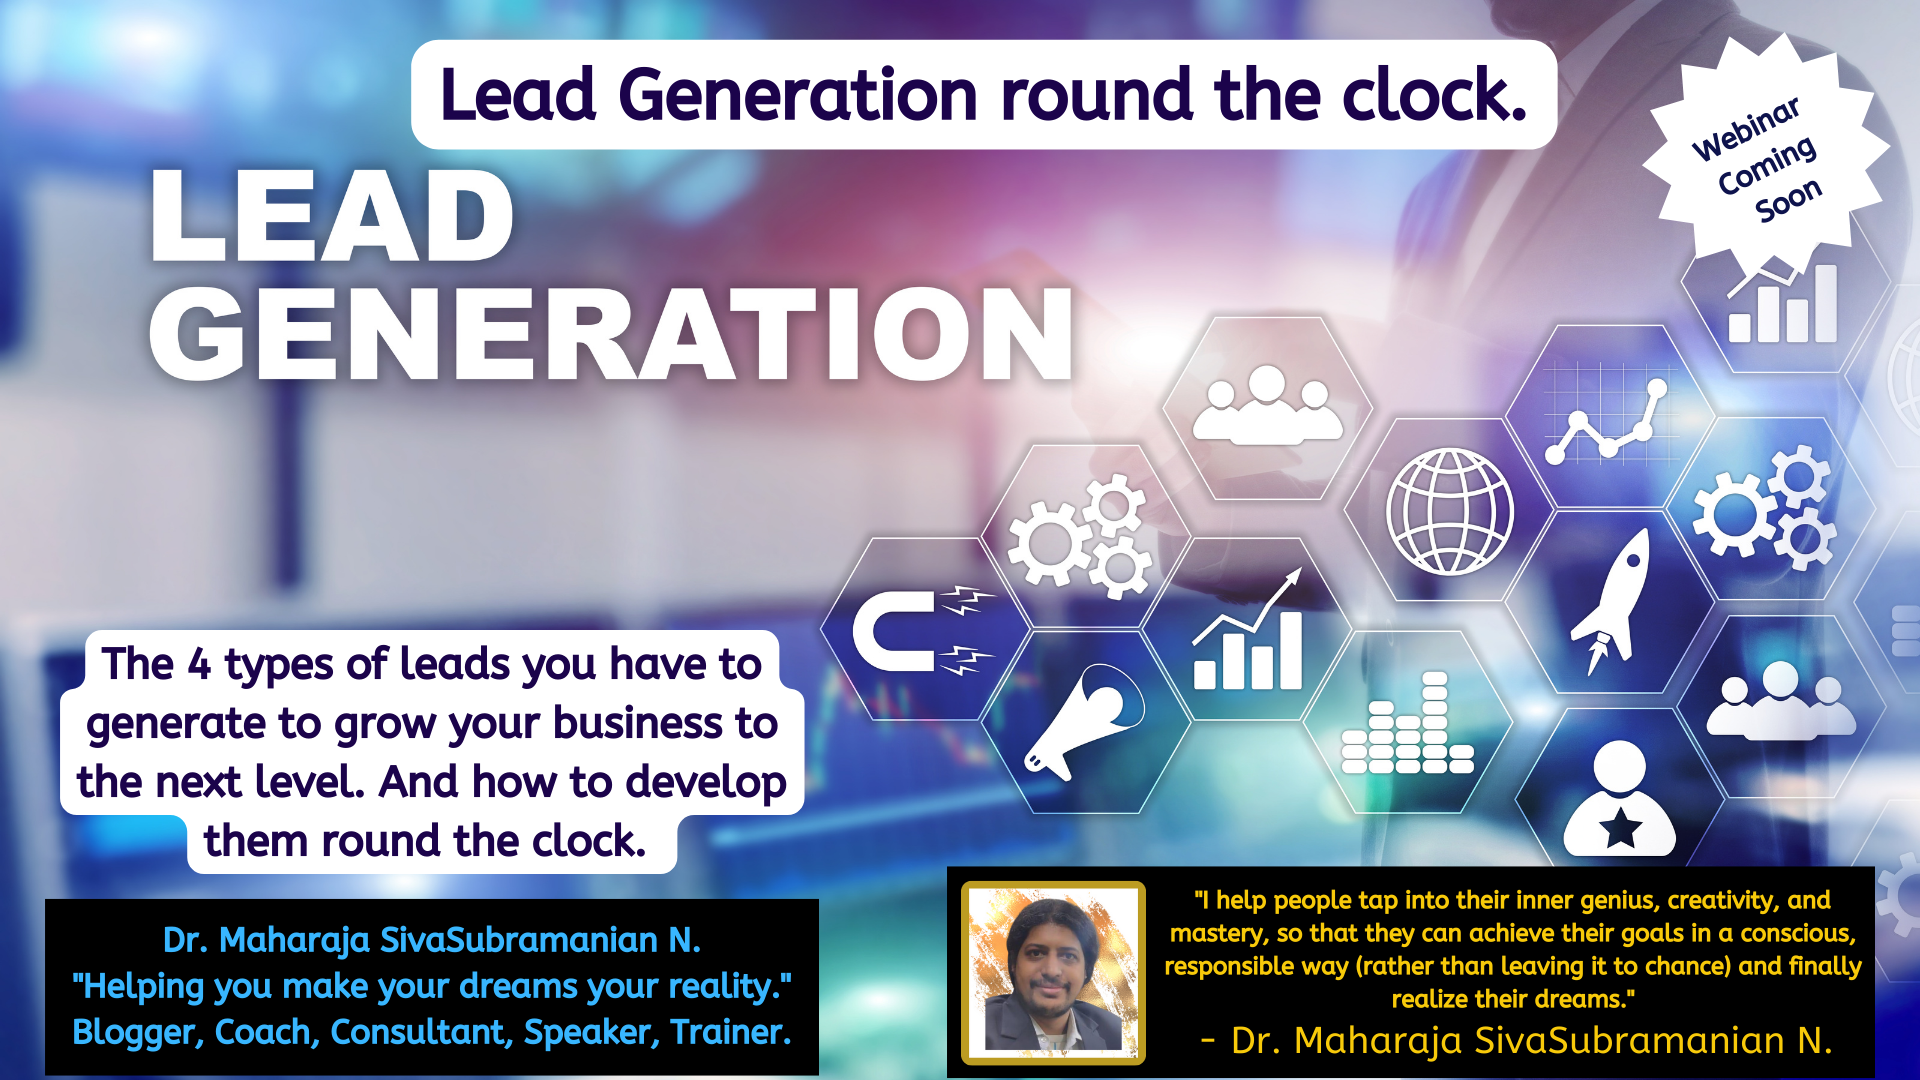 Lead Generation round the clock for Business Consultants. – Upcoming free webinar.